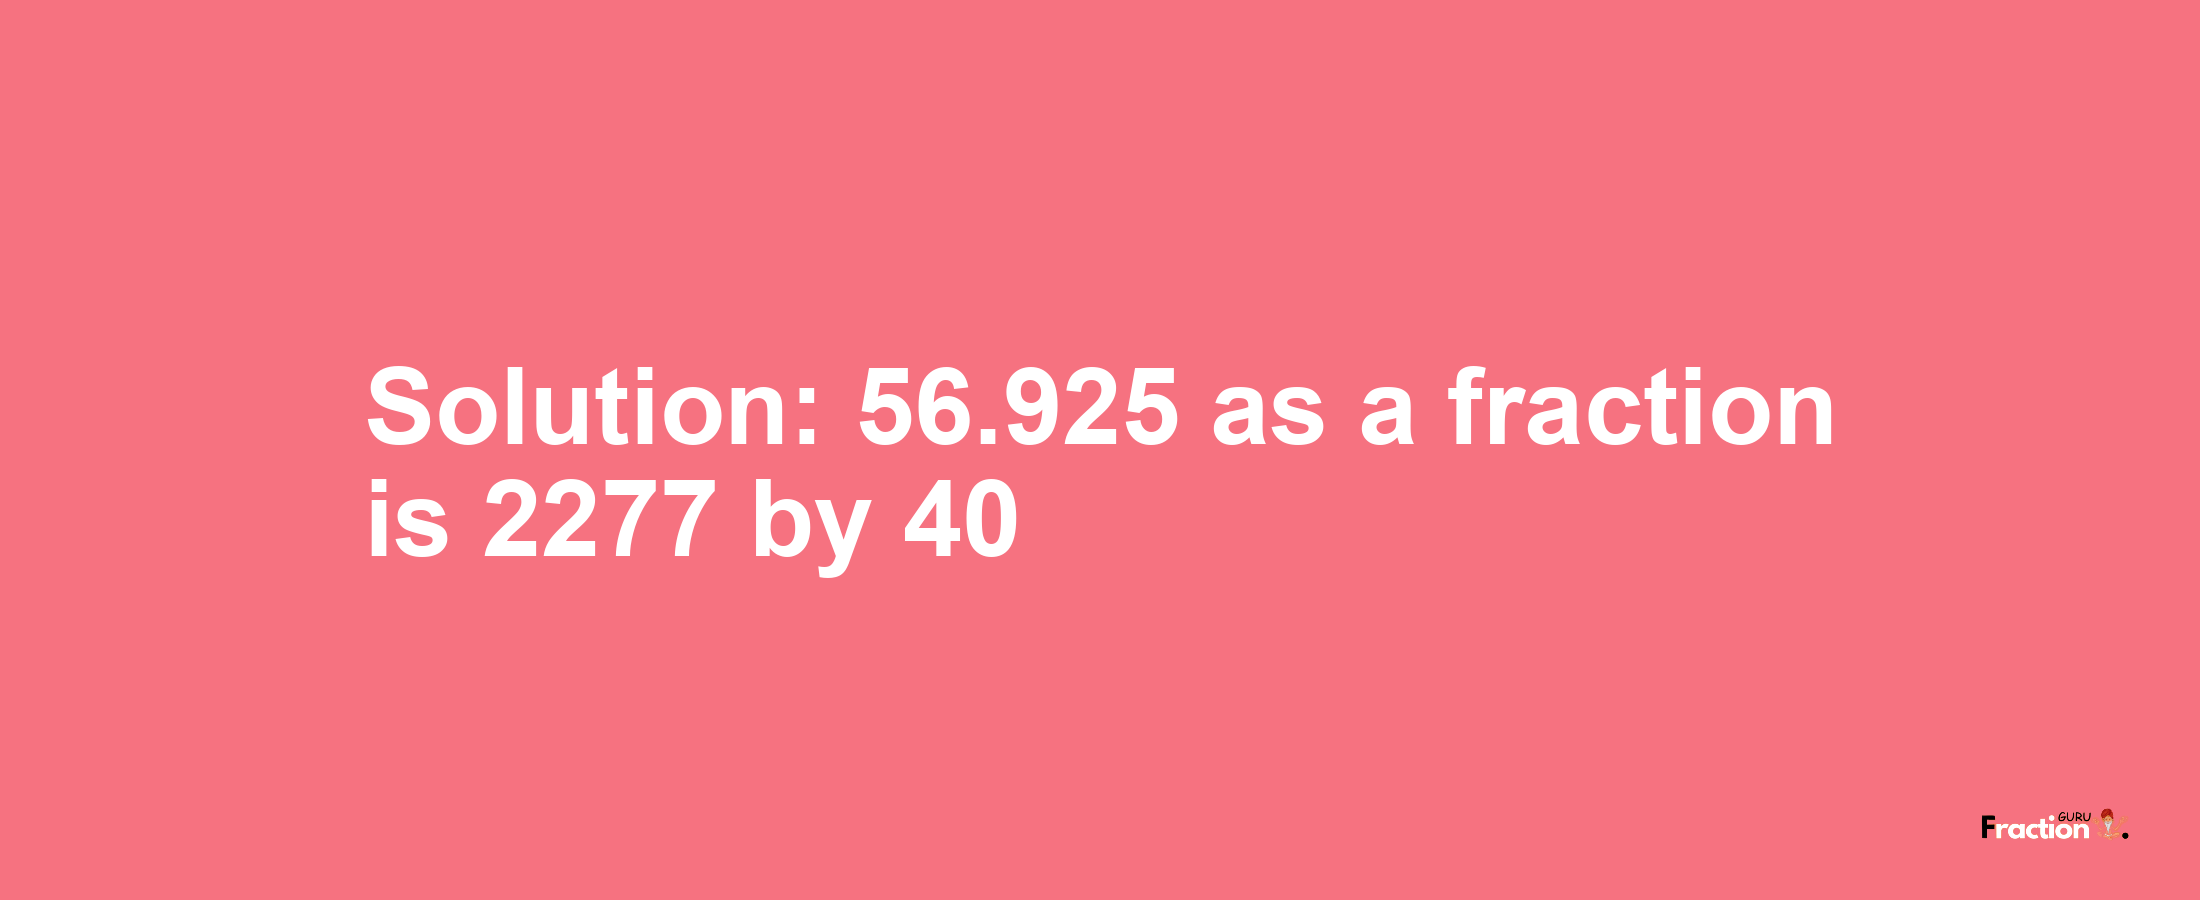 Solution:56.925 as a fraction is 2277/40